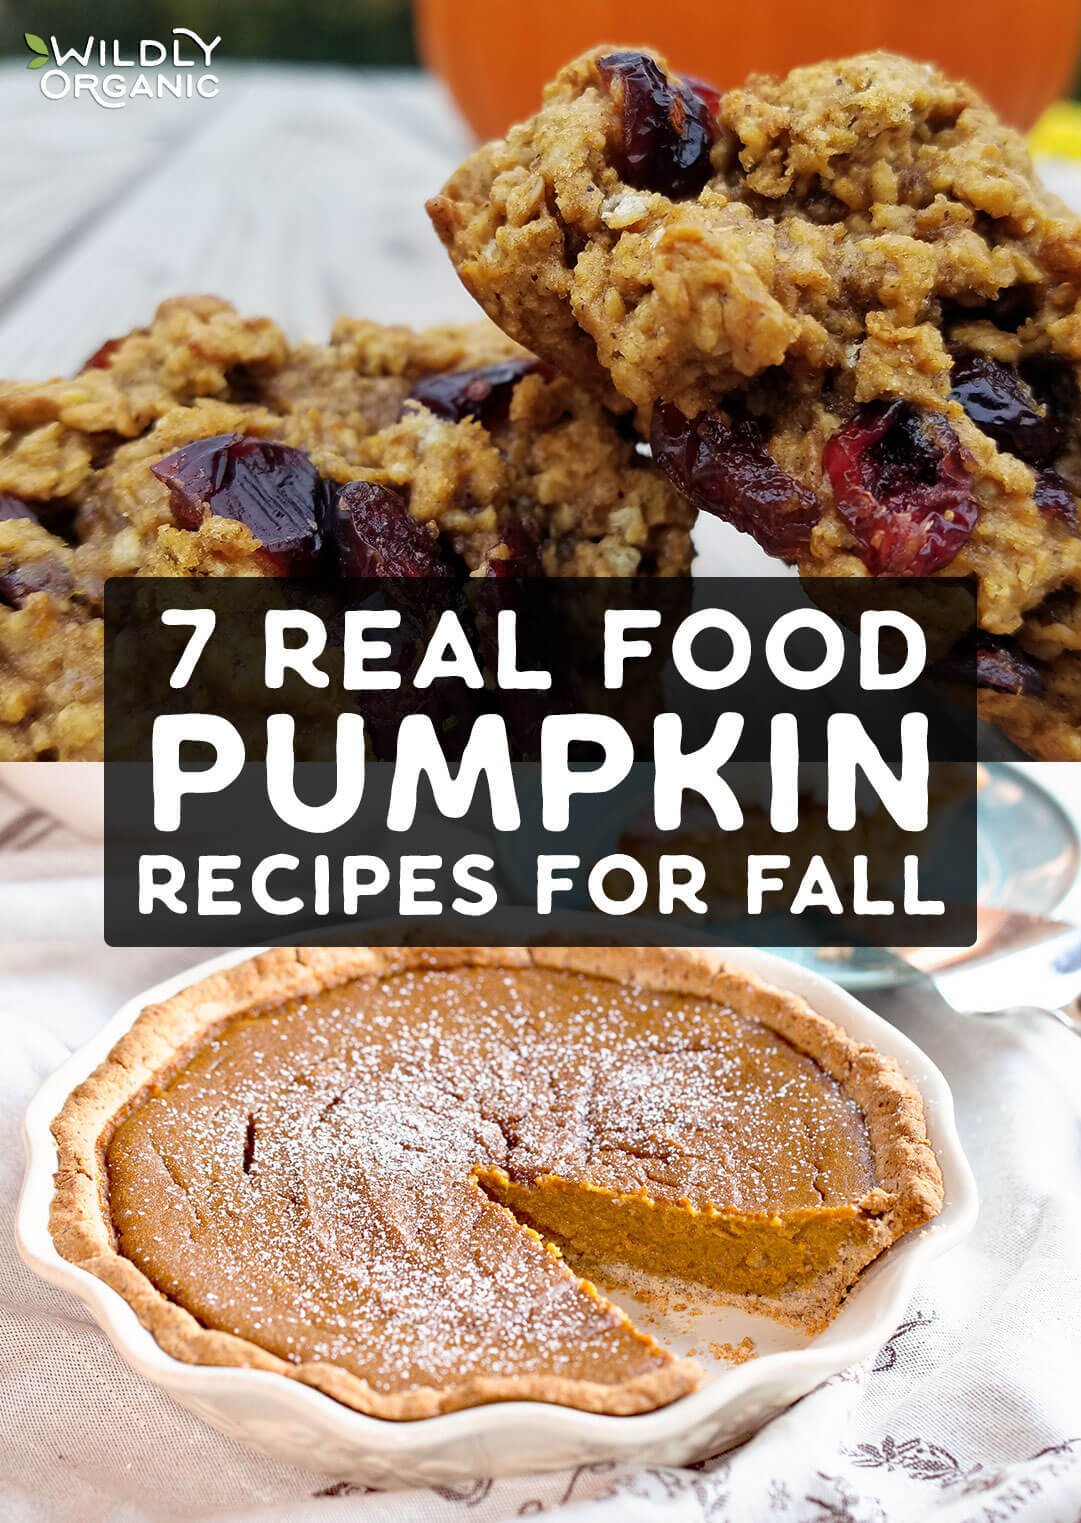 Collage of pumpkin recipes | 7 Real Food Pumpkin Recipes for Fall | We're bringing you 7 pumpkin recipes for fall made from real food ingredients including many gluten-free, paleo, vegan and refined sugar-free options! 